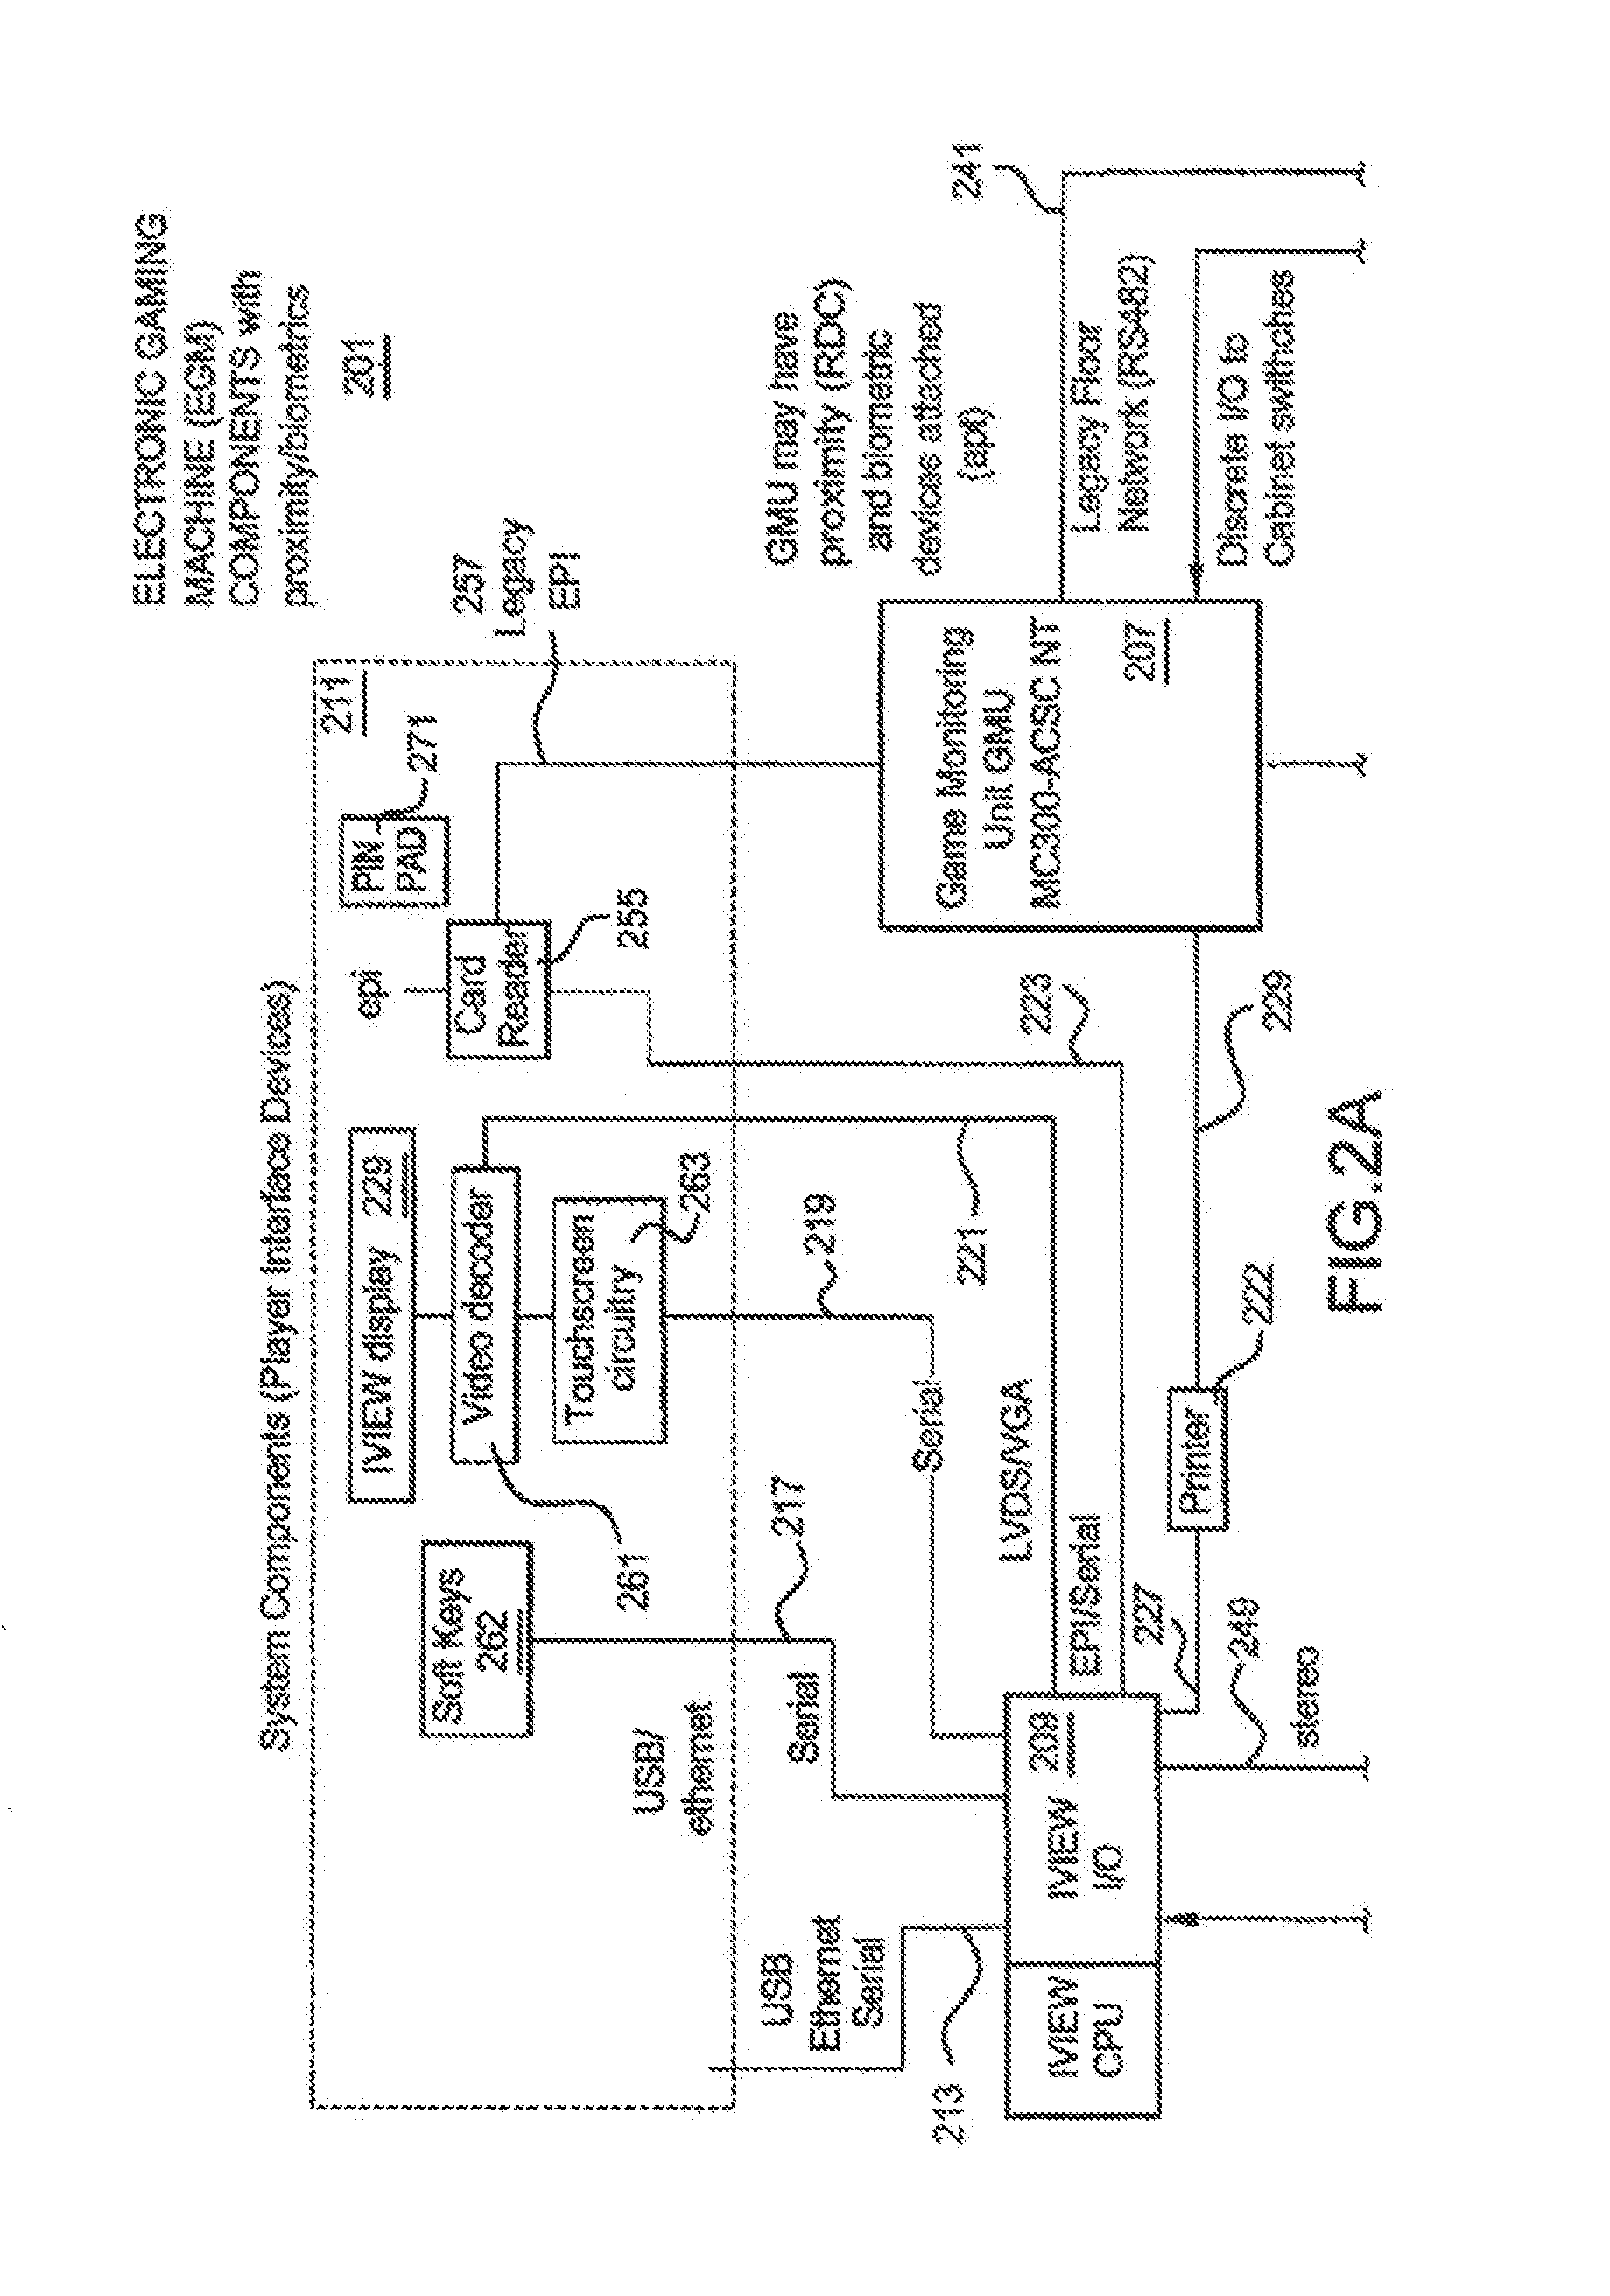 System, apparatus and method for dynamically adjusting a video presentation based upon age